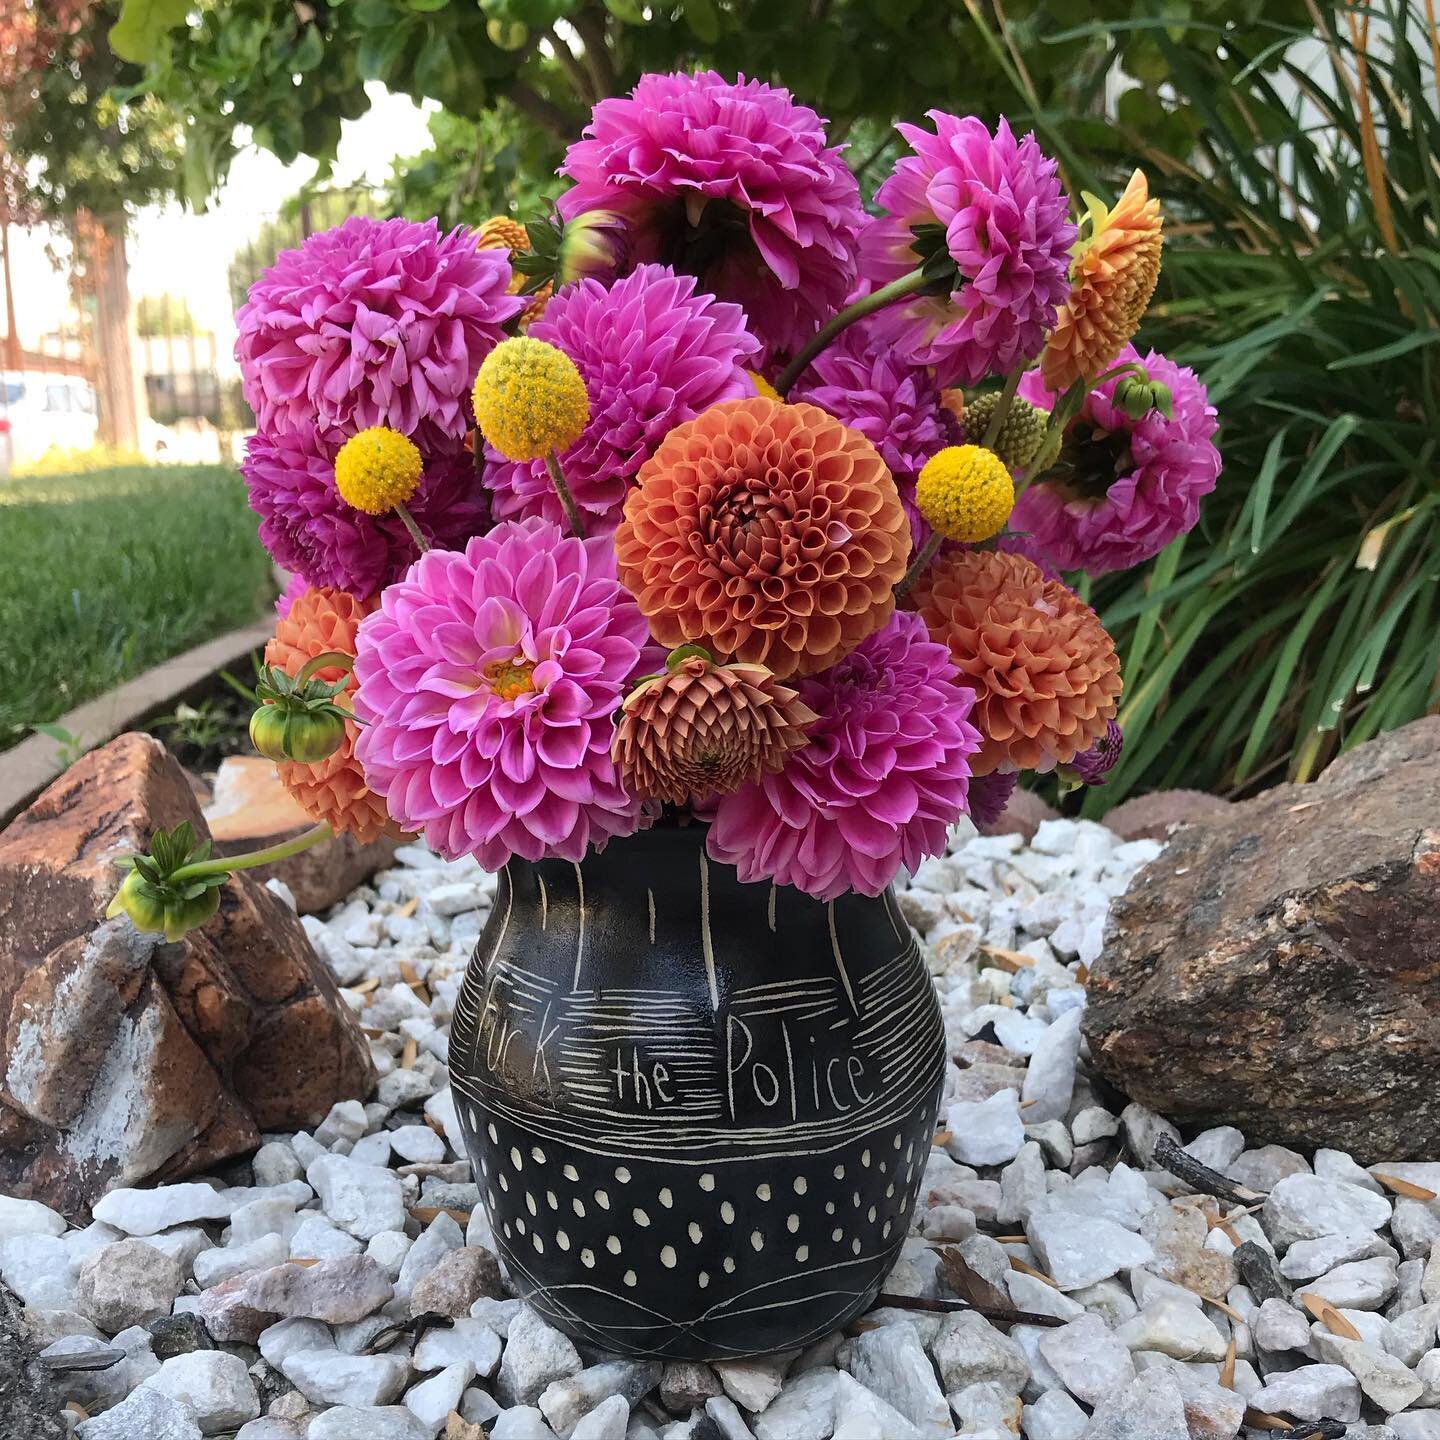 💖 These dahlias are such troopers! Hung out in my hot car for like 3 hrs then spent the day in a Gatorade bottle before I could actually bring them home and put them in my favorite vase.
.
.
.
.
.

#mxyxdmedia #mixedmedia #mixedmediaart #mindfulness